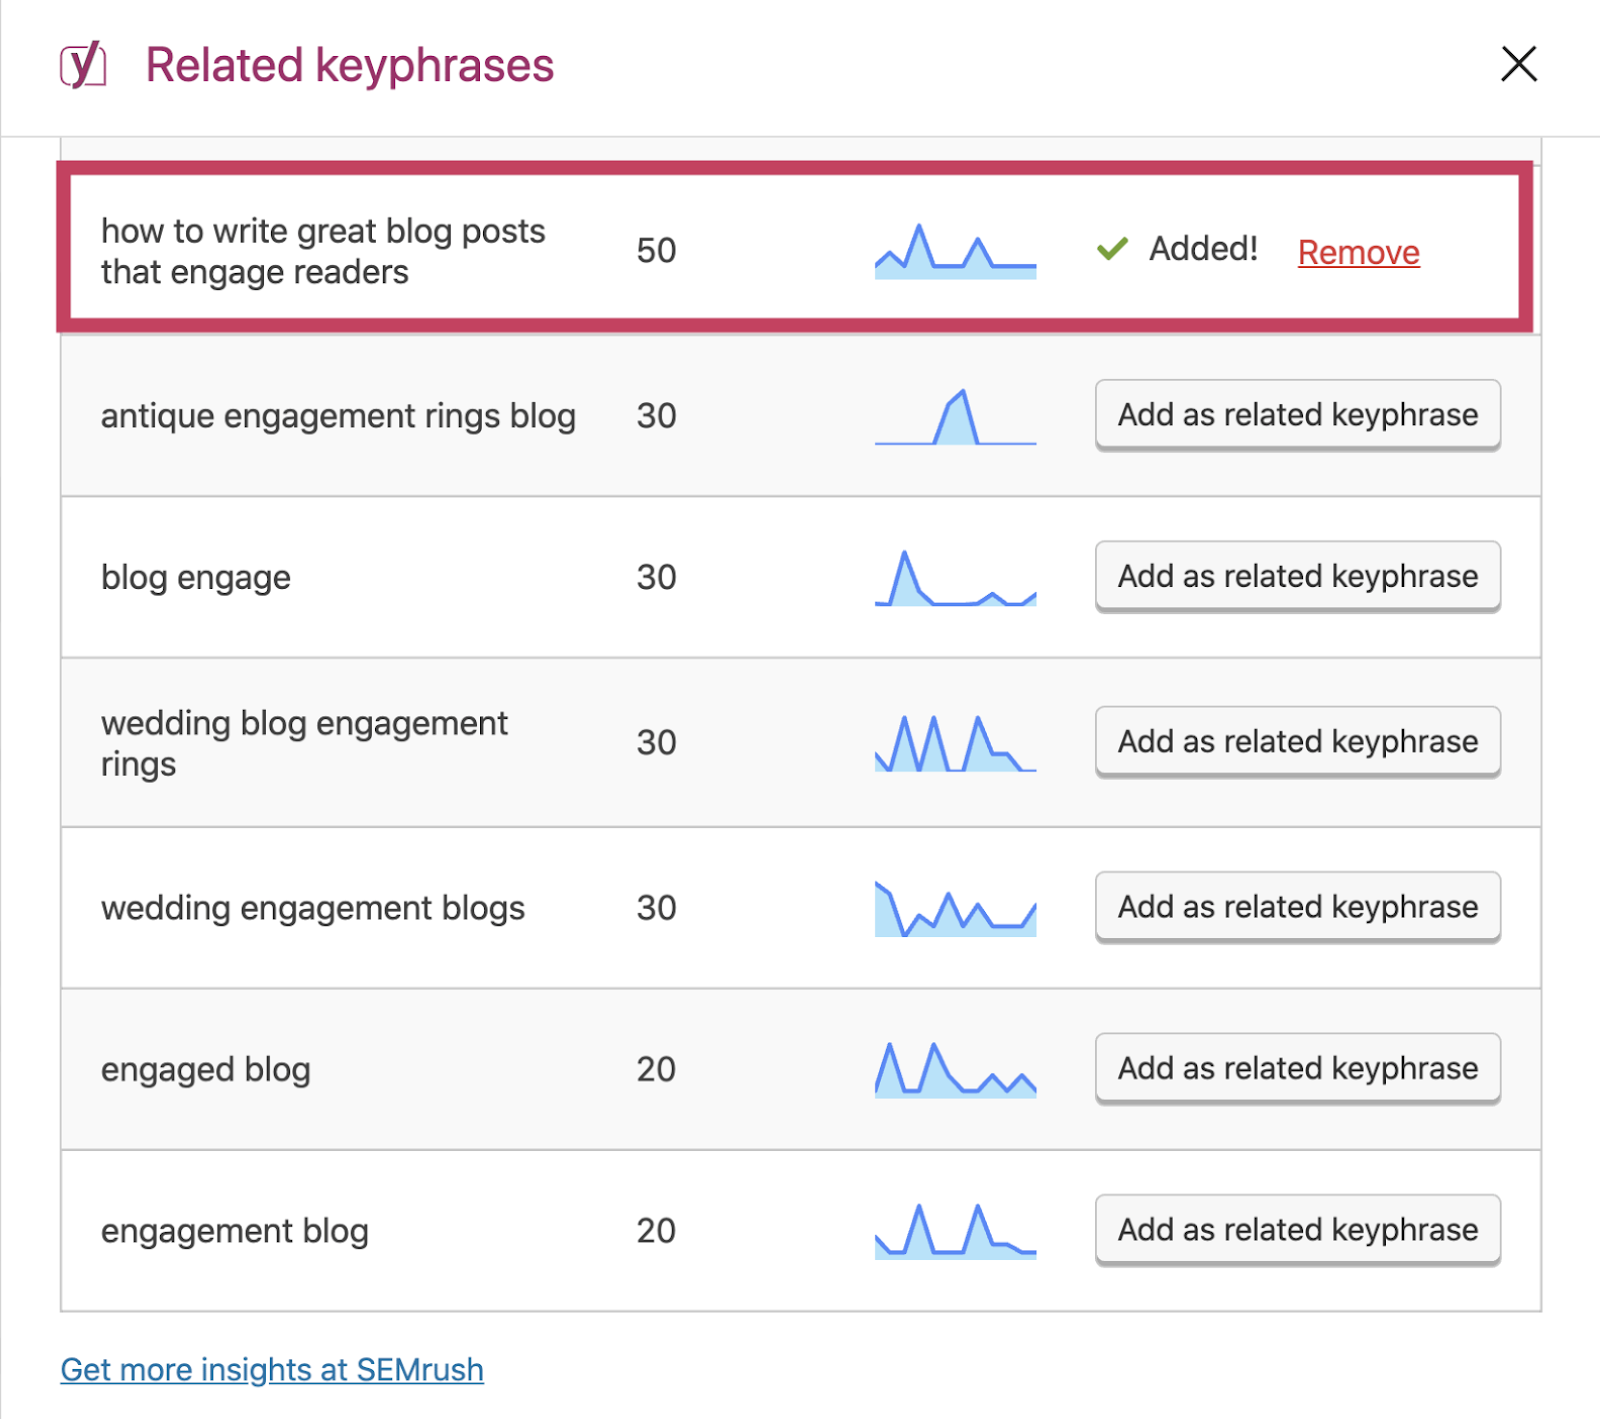 "Related keyphrases" section in Yoast SEO